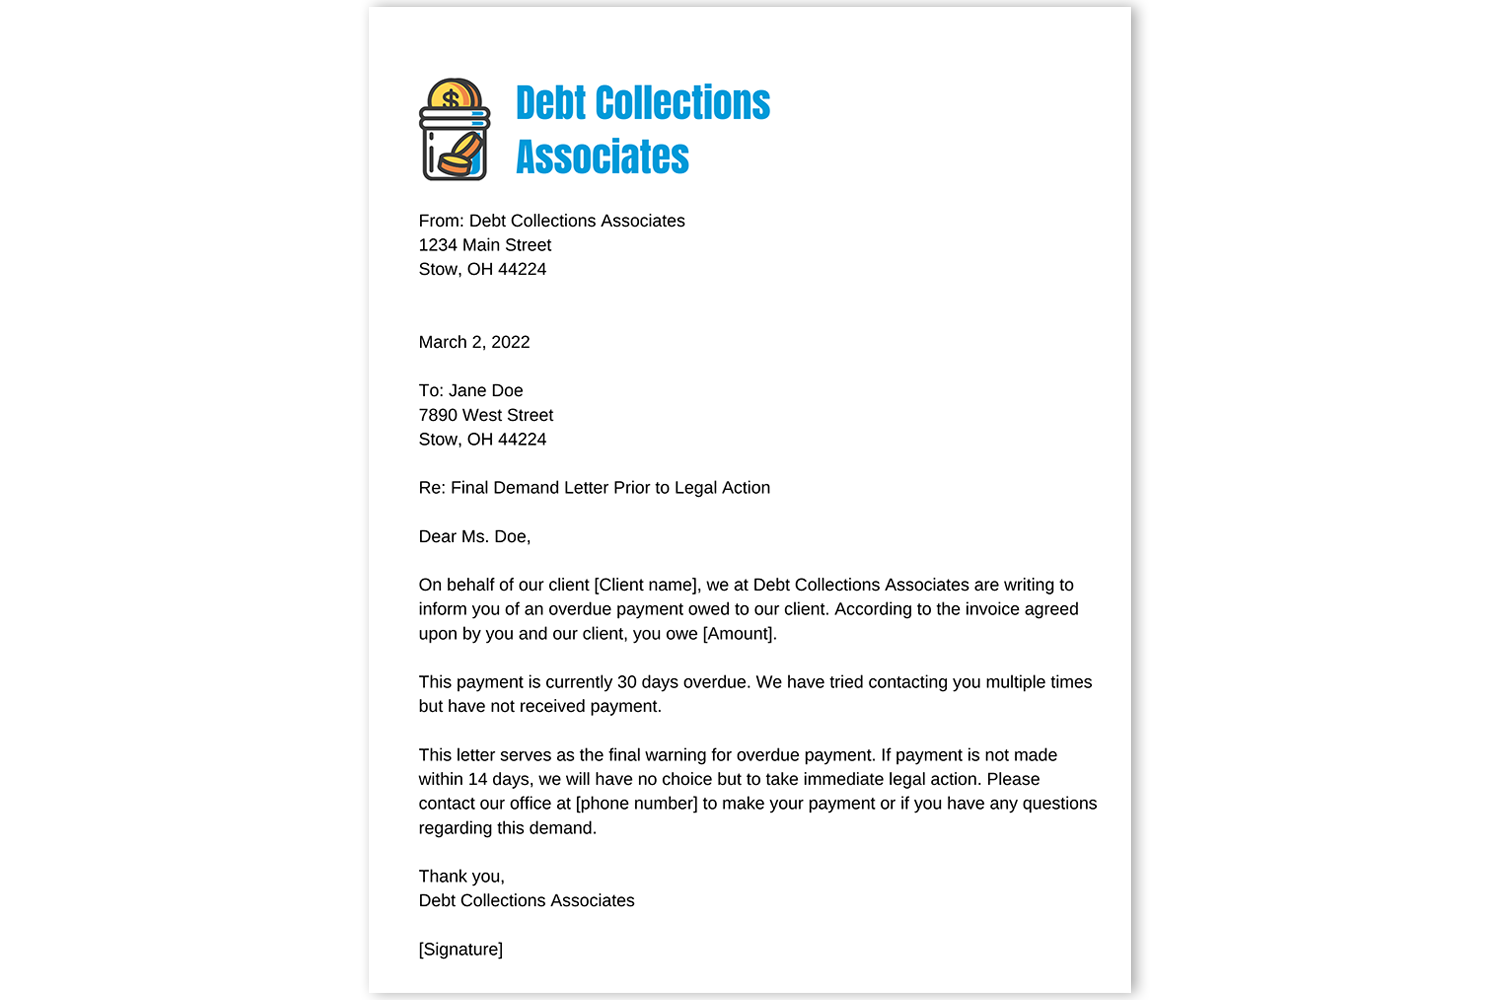 4 Effective and Ethical Debt Collection Letter Examples Etactics